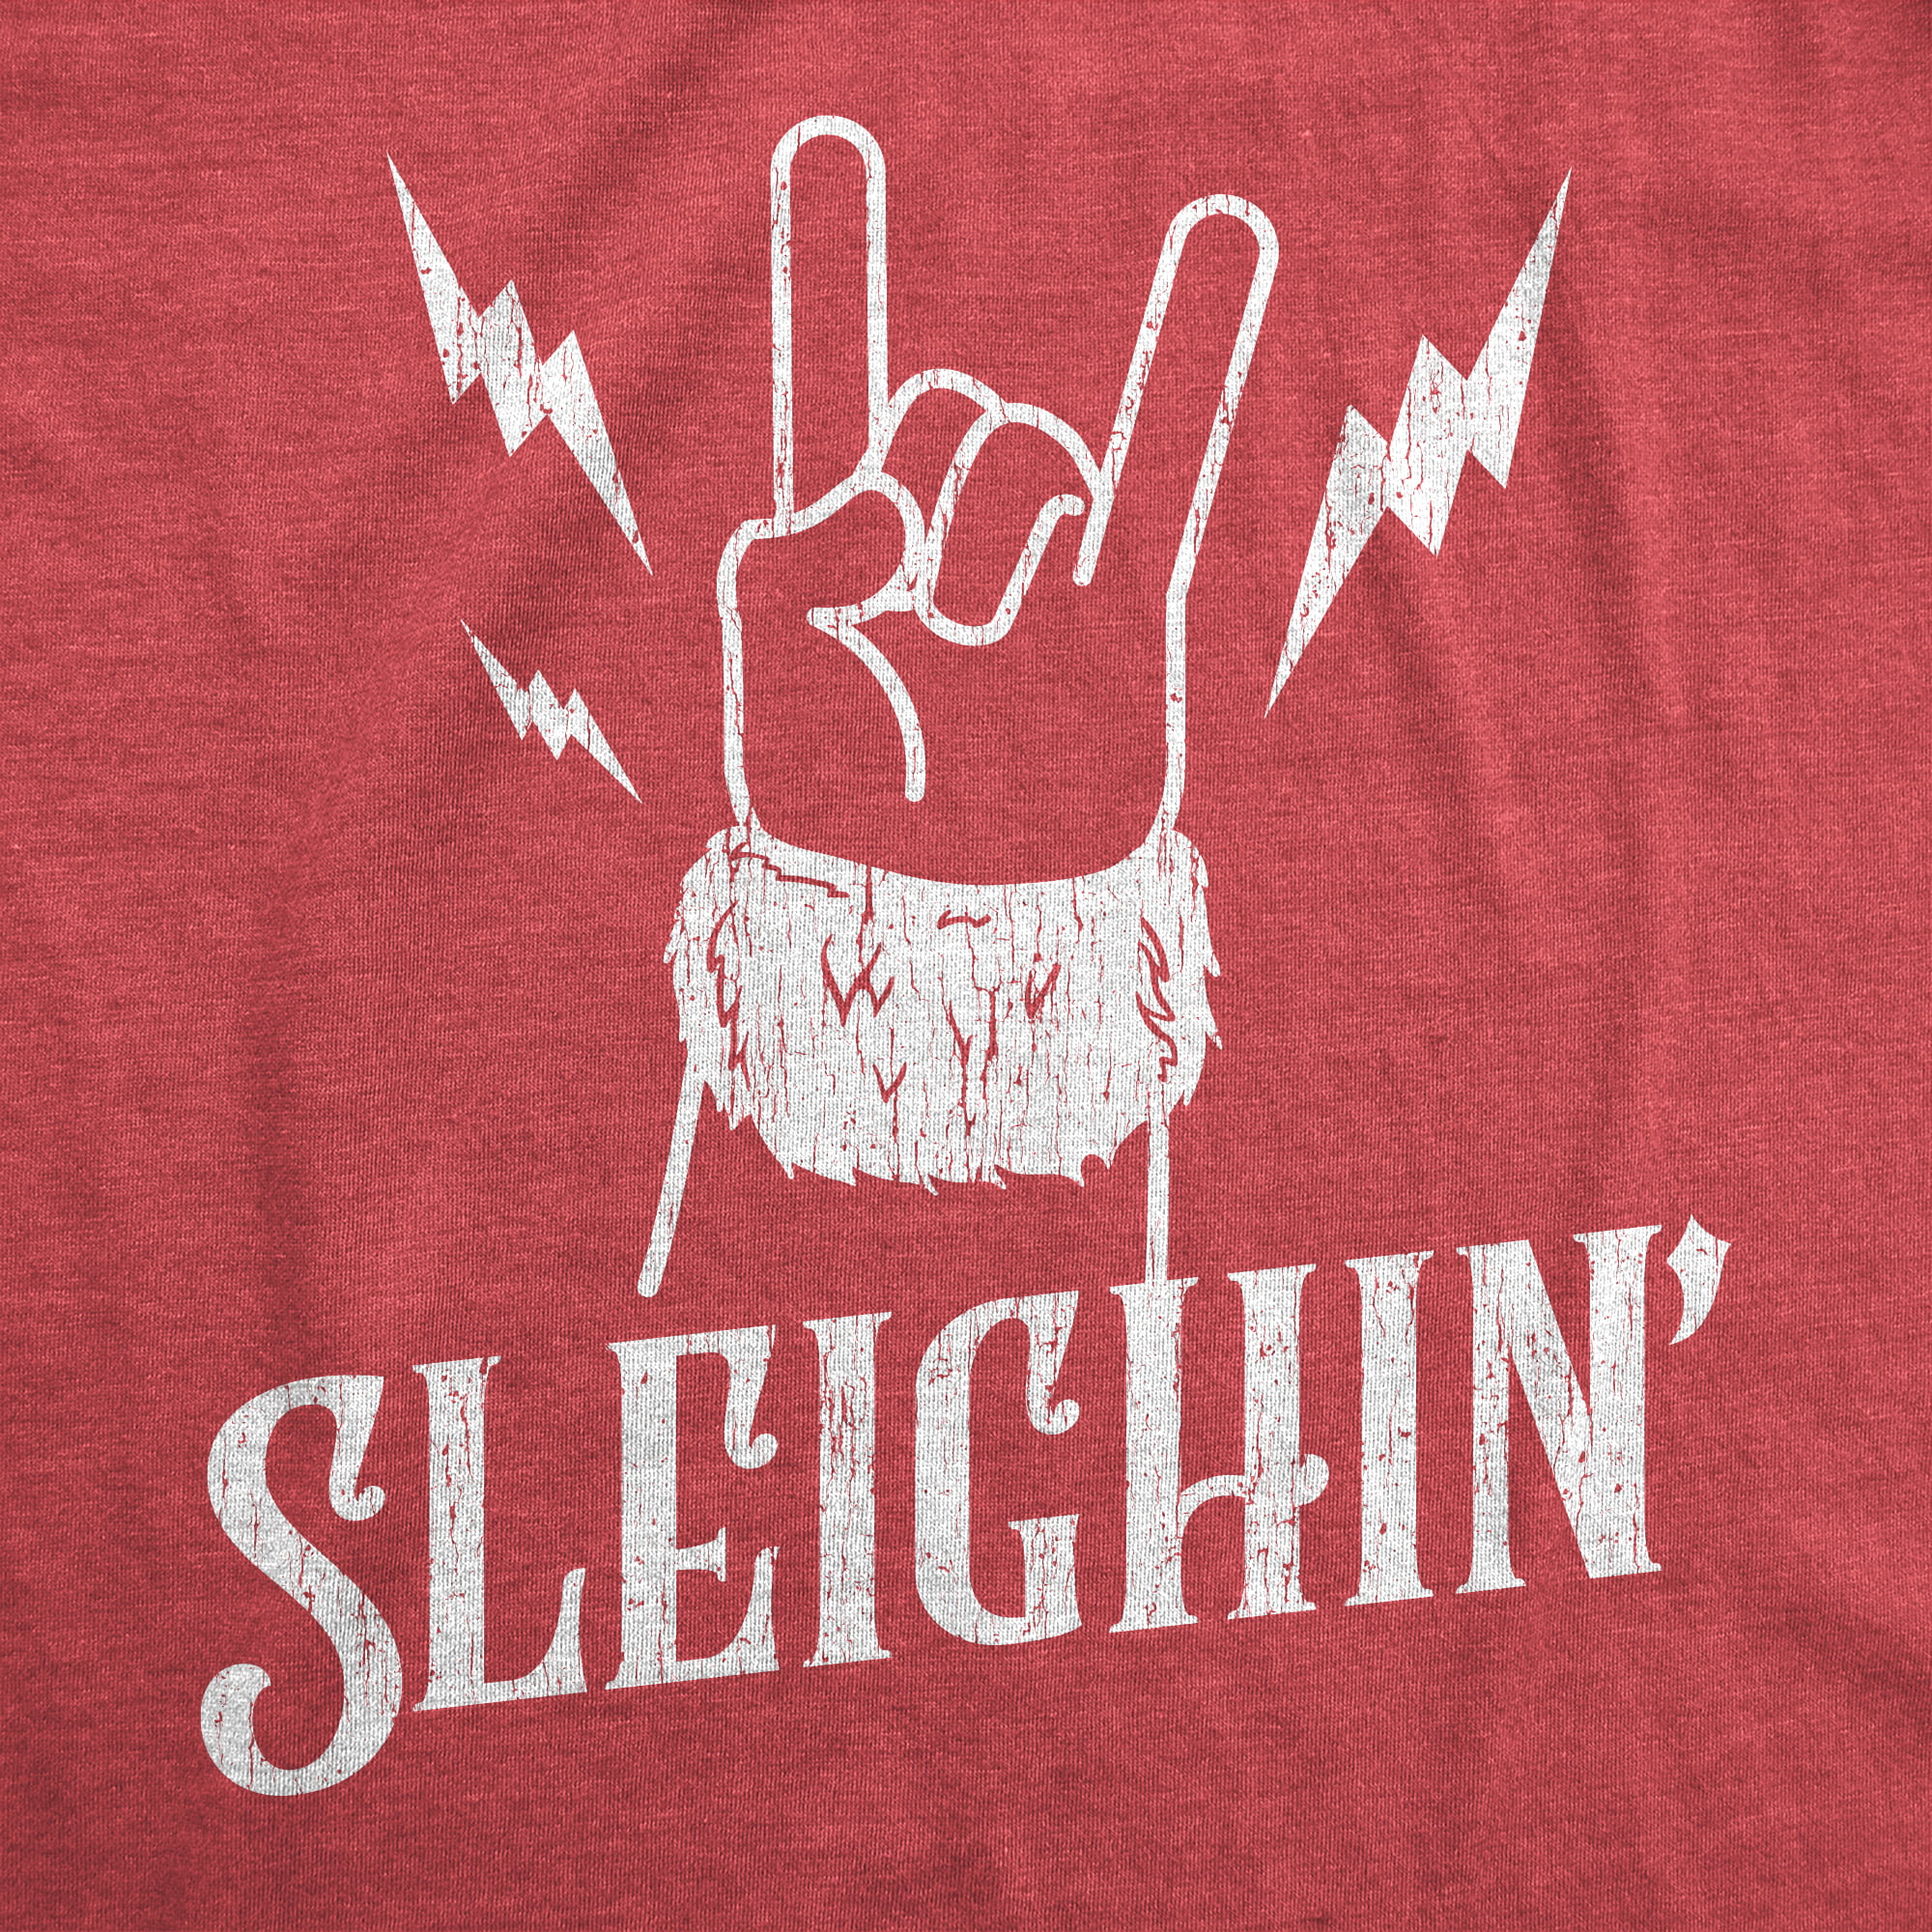 Mens (Heather Tee Fingers Santa Funny Roll - Graphic And Sleighin Red) Rock Tees S Metal Claus Graphic Christmas Tshirt